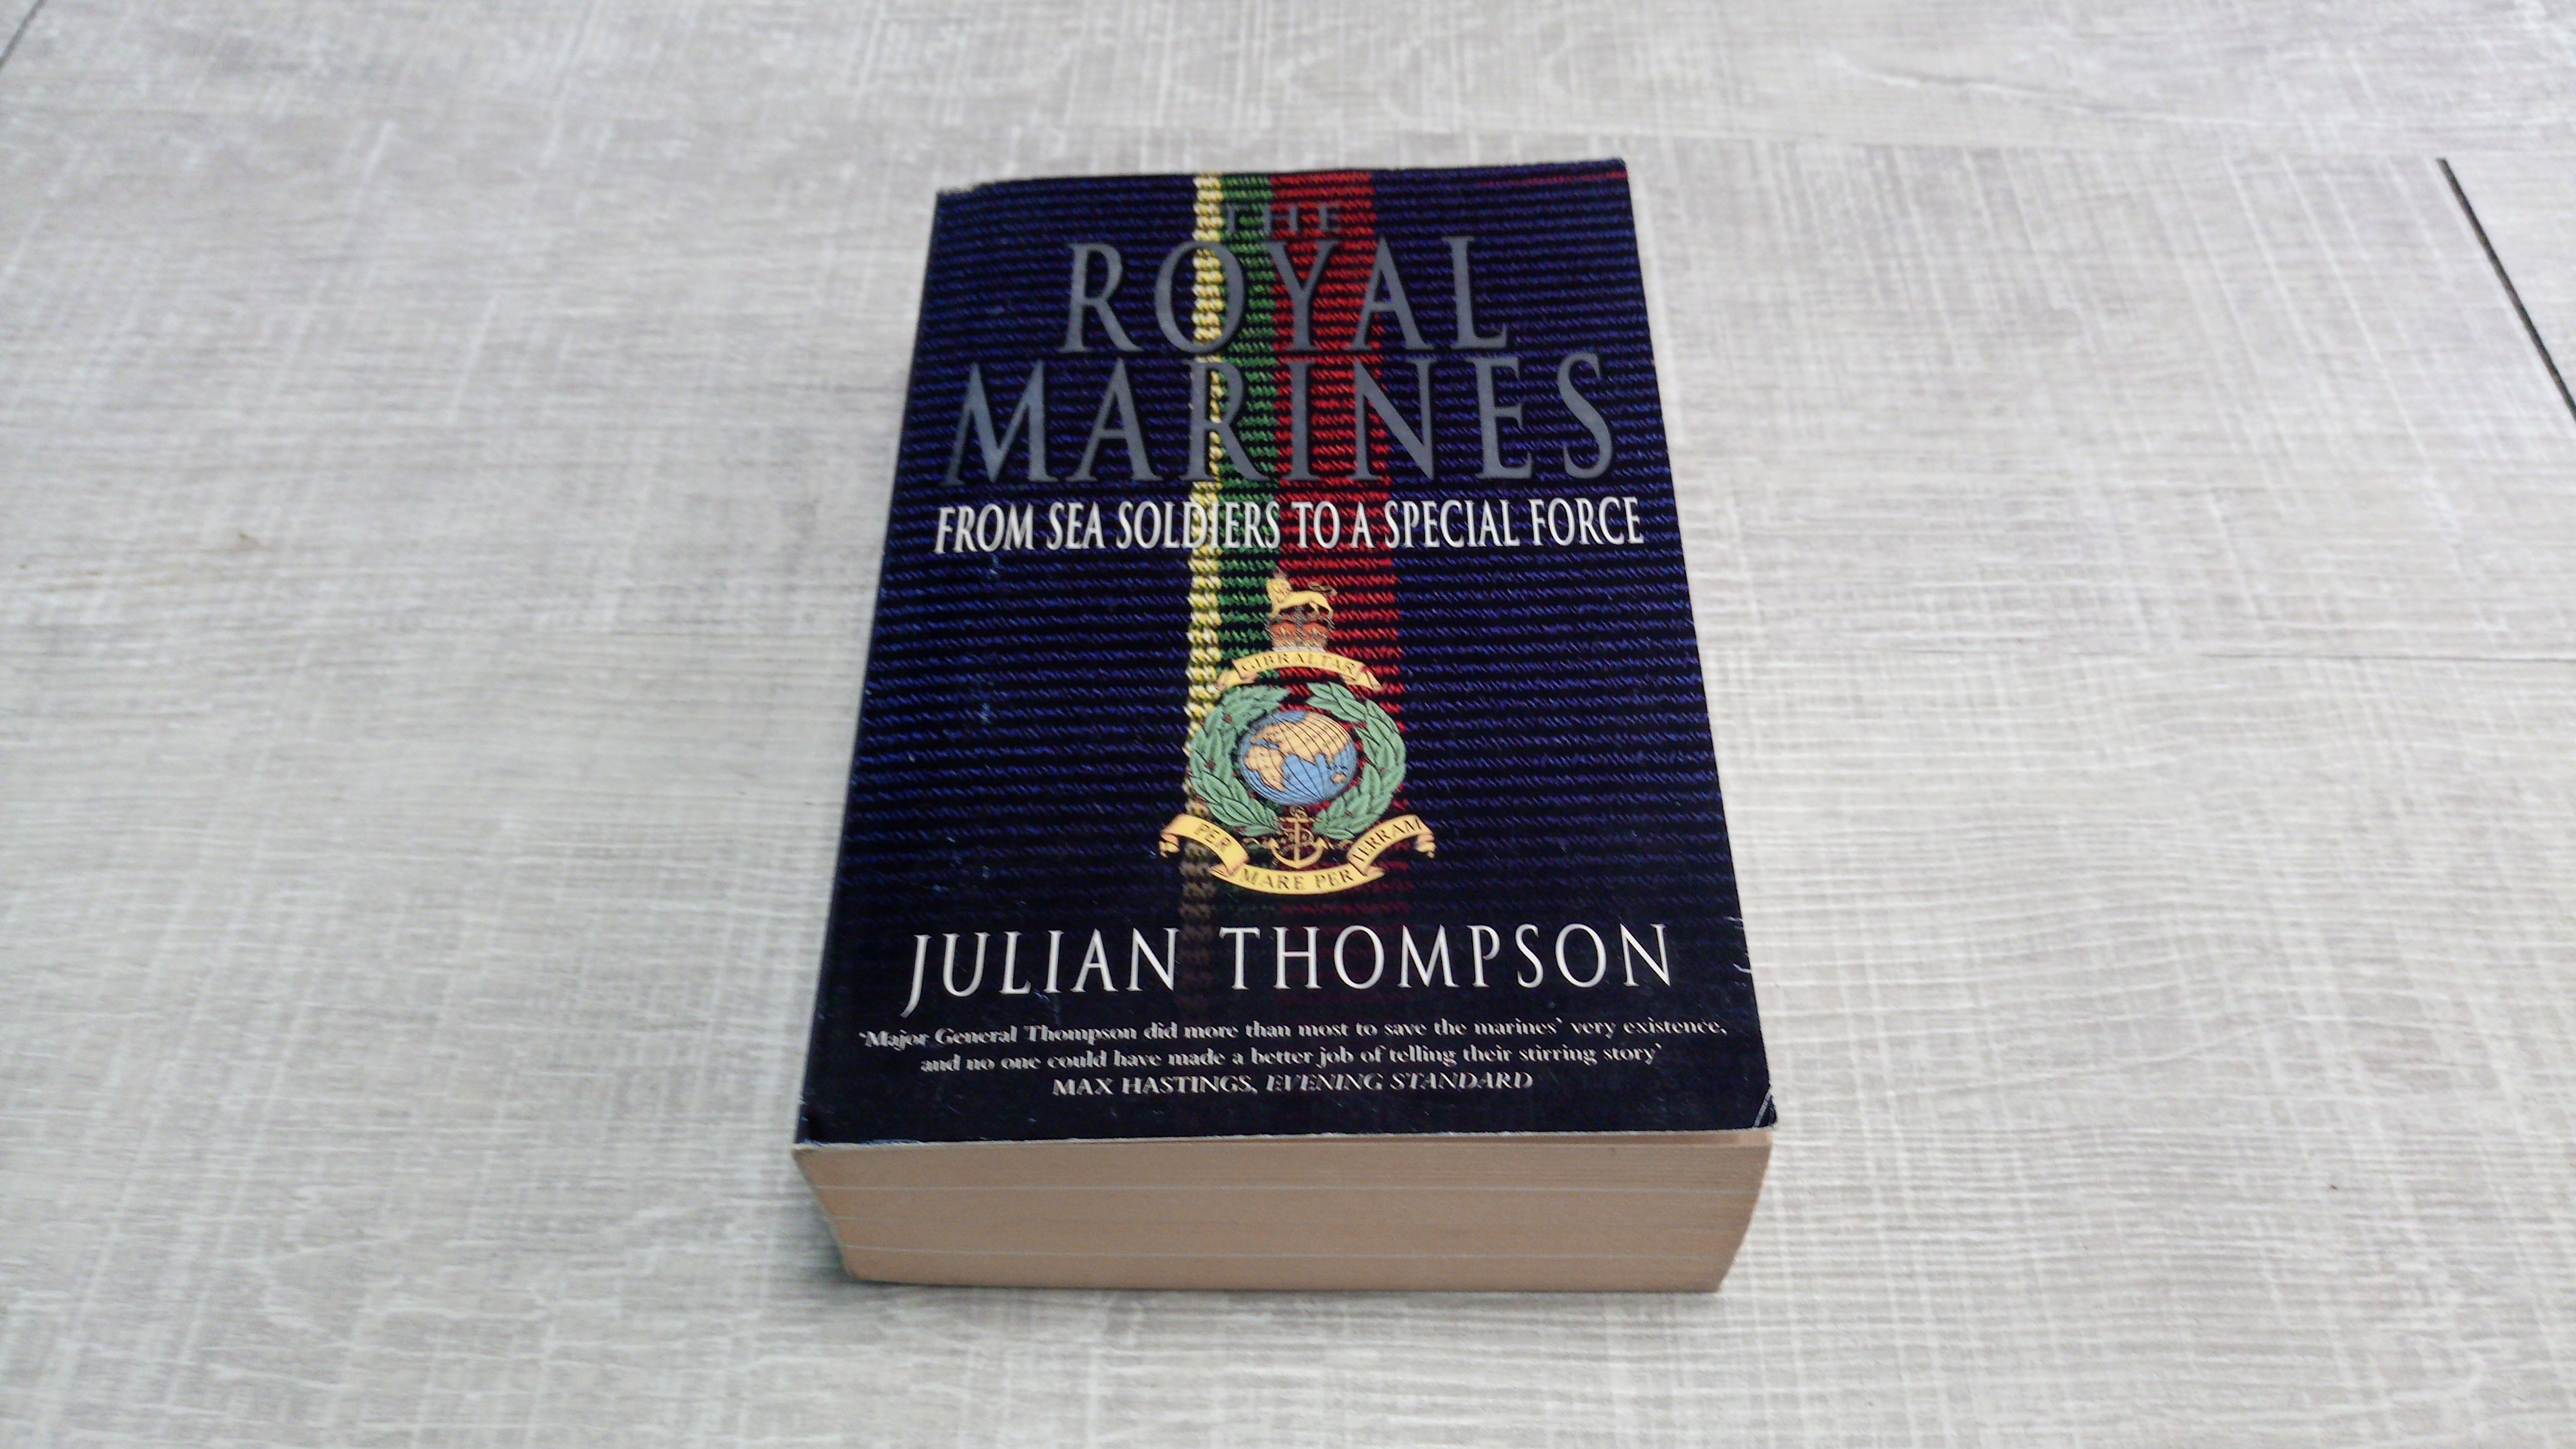 The Royal Marines: From Sea Soldiers to a Special Force